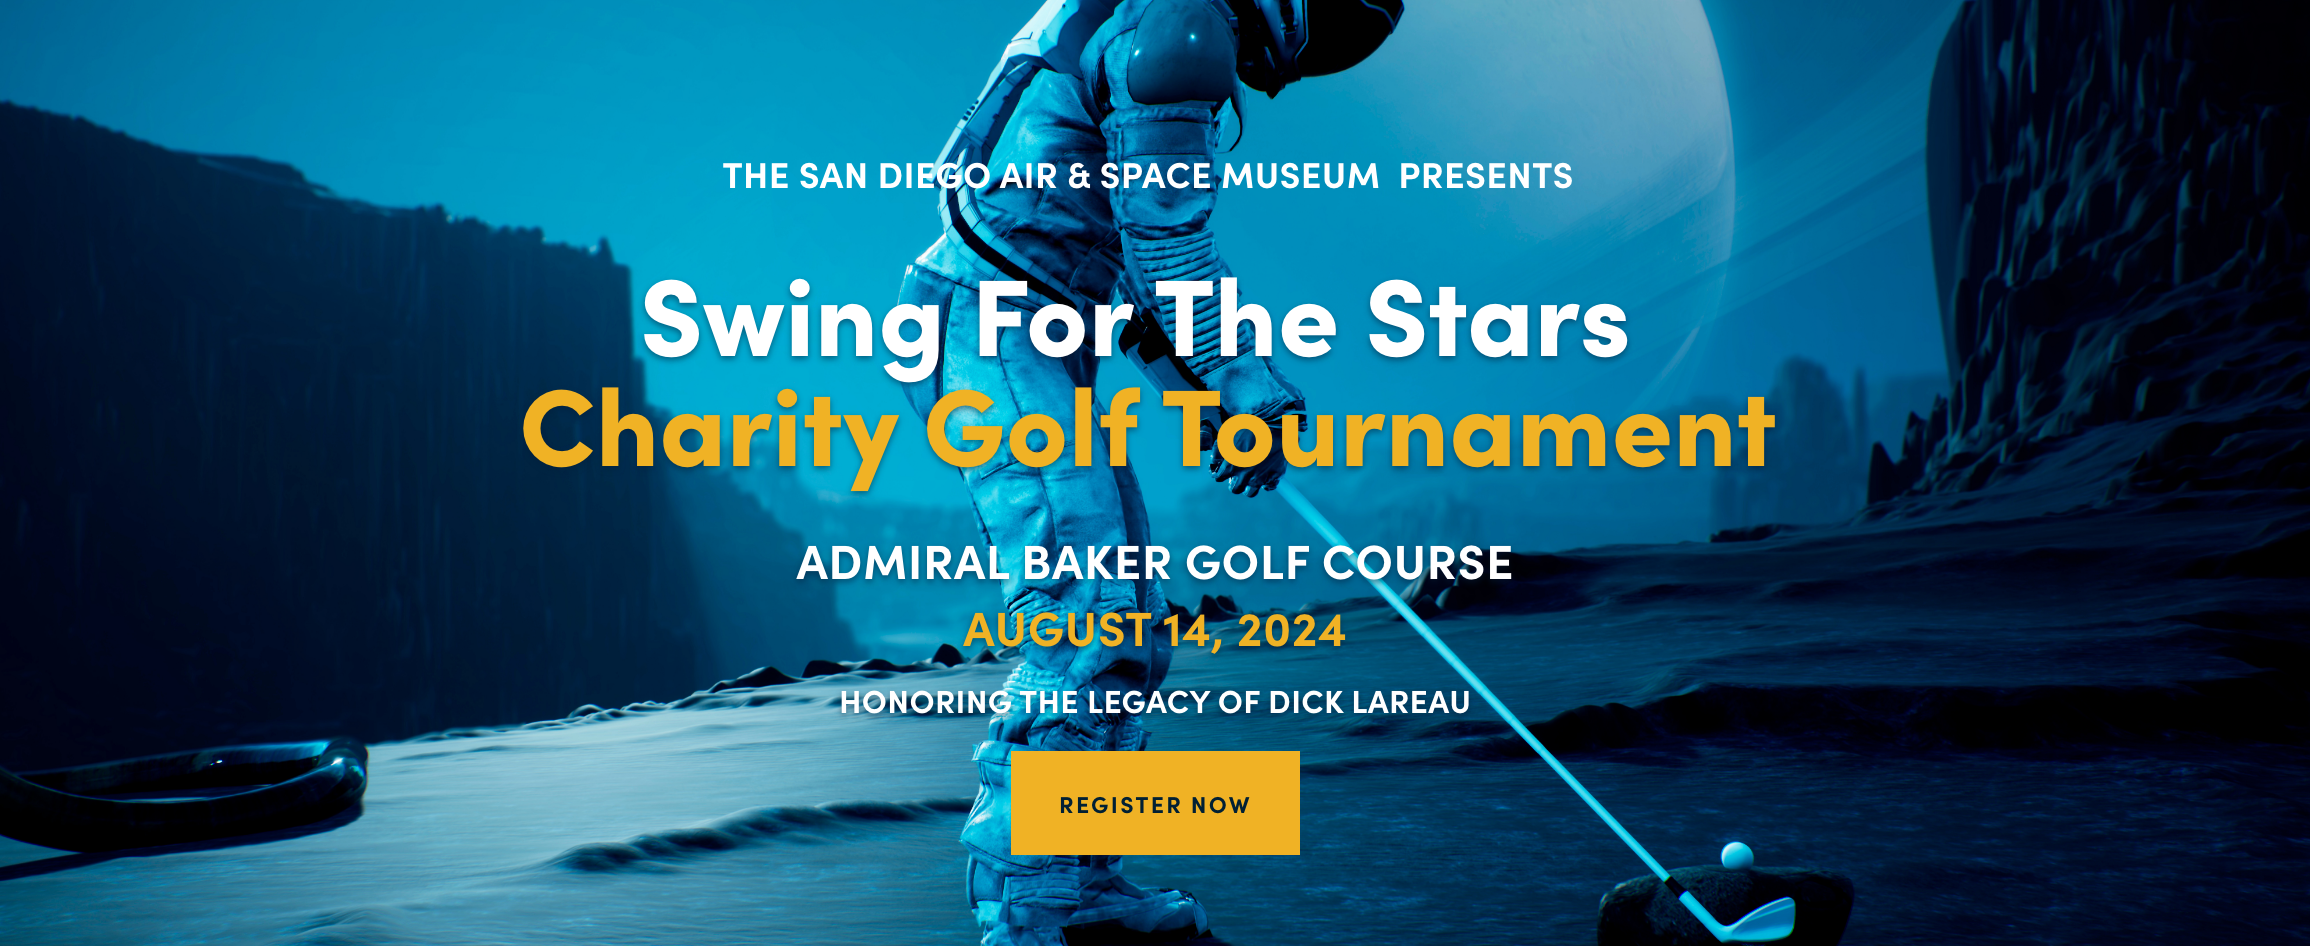 Promotional Image for the Golf Tournament featuring an Astronaut playing golf